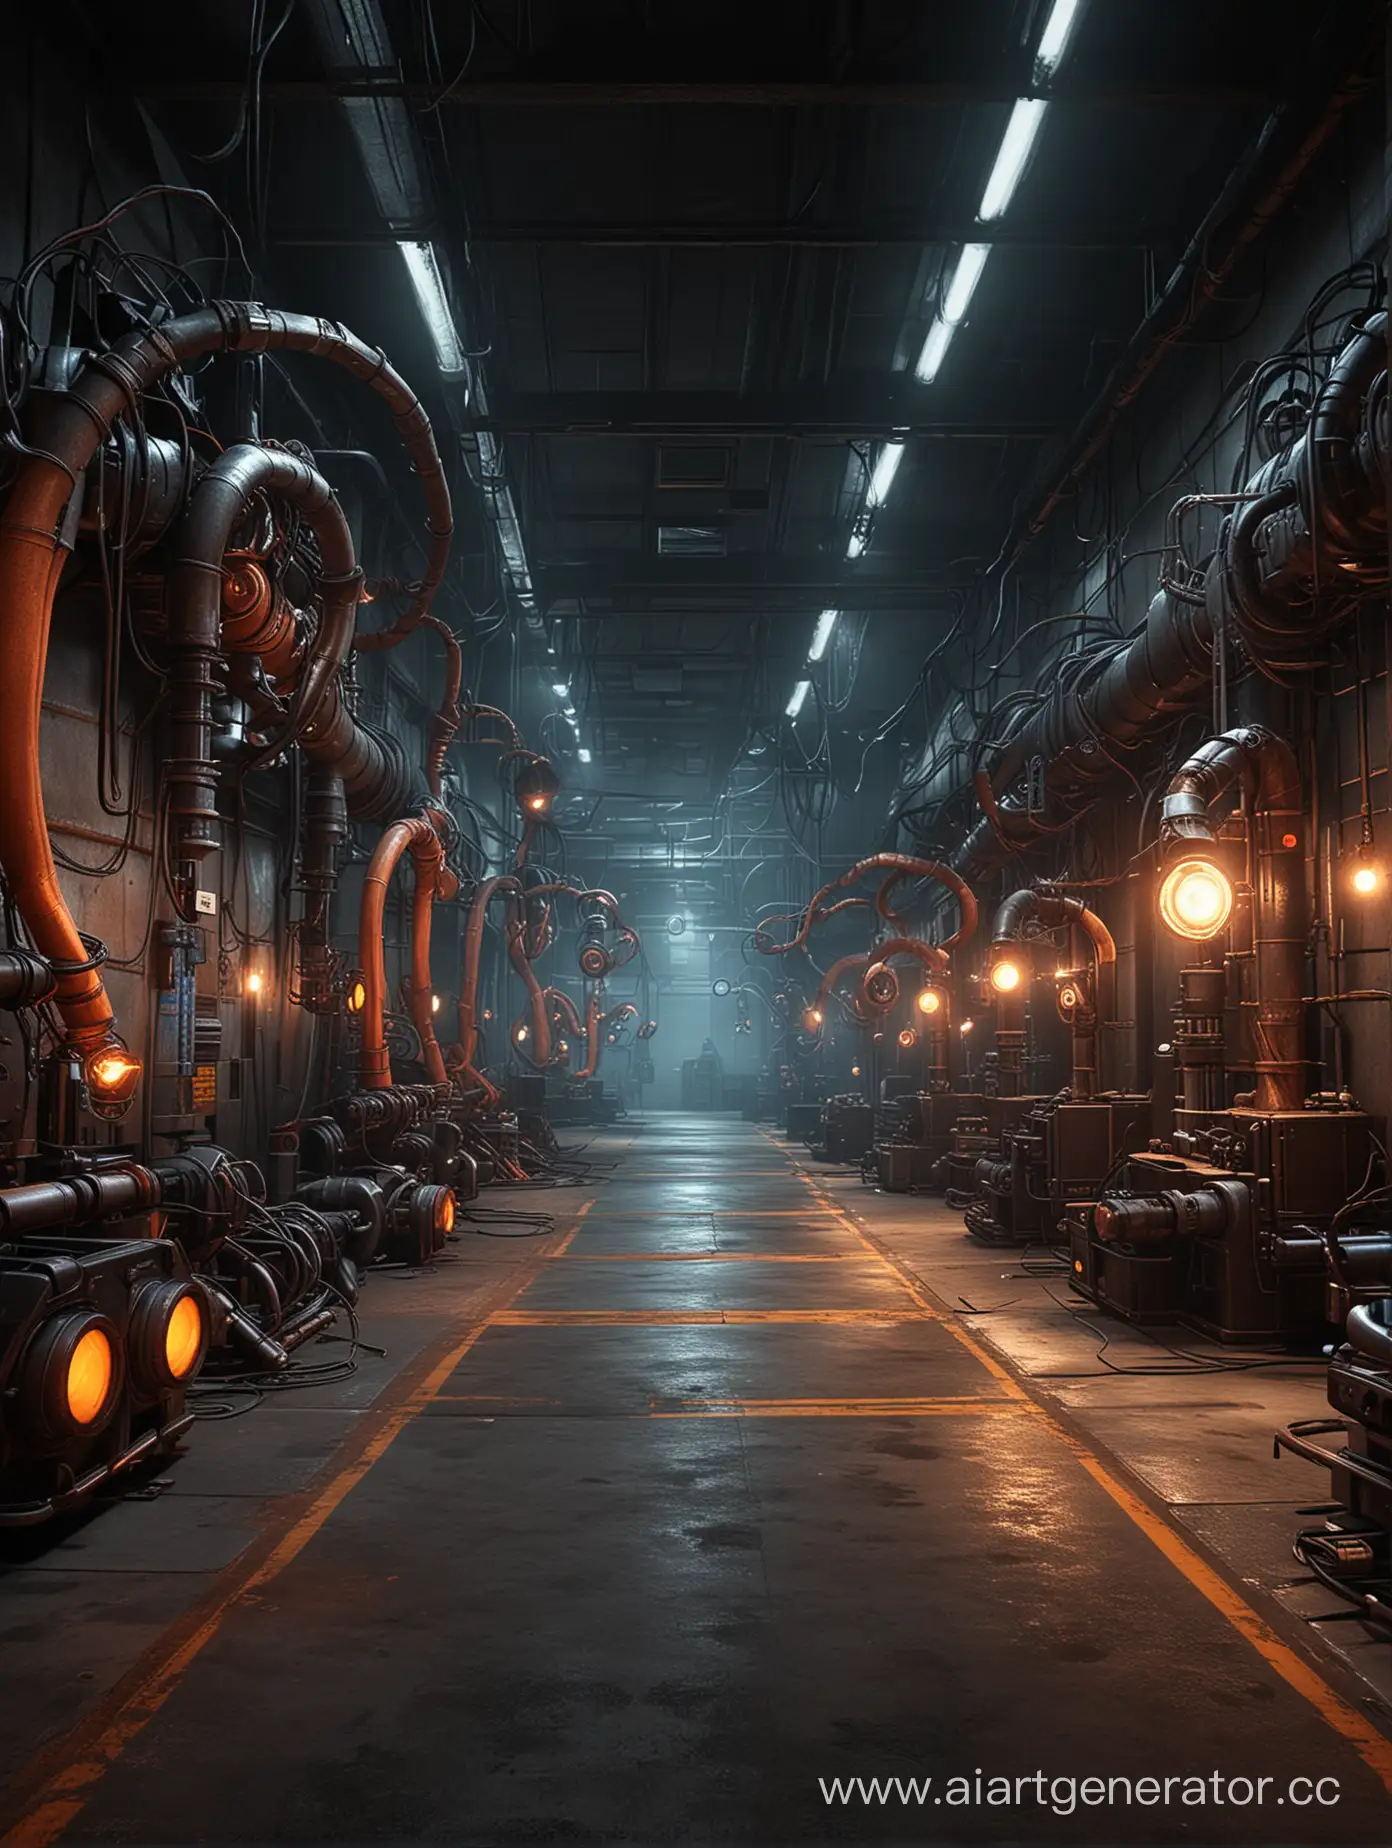 Sinister Black Mesa laboratory ::5
Ethereal glow of neon ::4
Monstrous creatures prowling or sprinting ::4
Dynamic motion, tension in the air ::3
Detailed industrial machinery ::3
Cinematic lighting, dramatic shadows ::2
--s 250